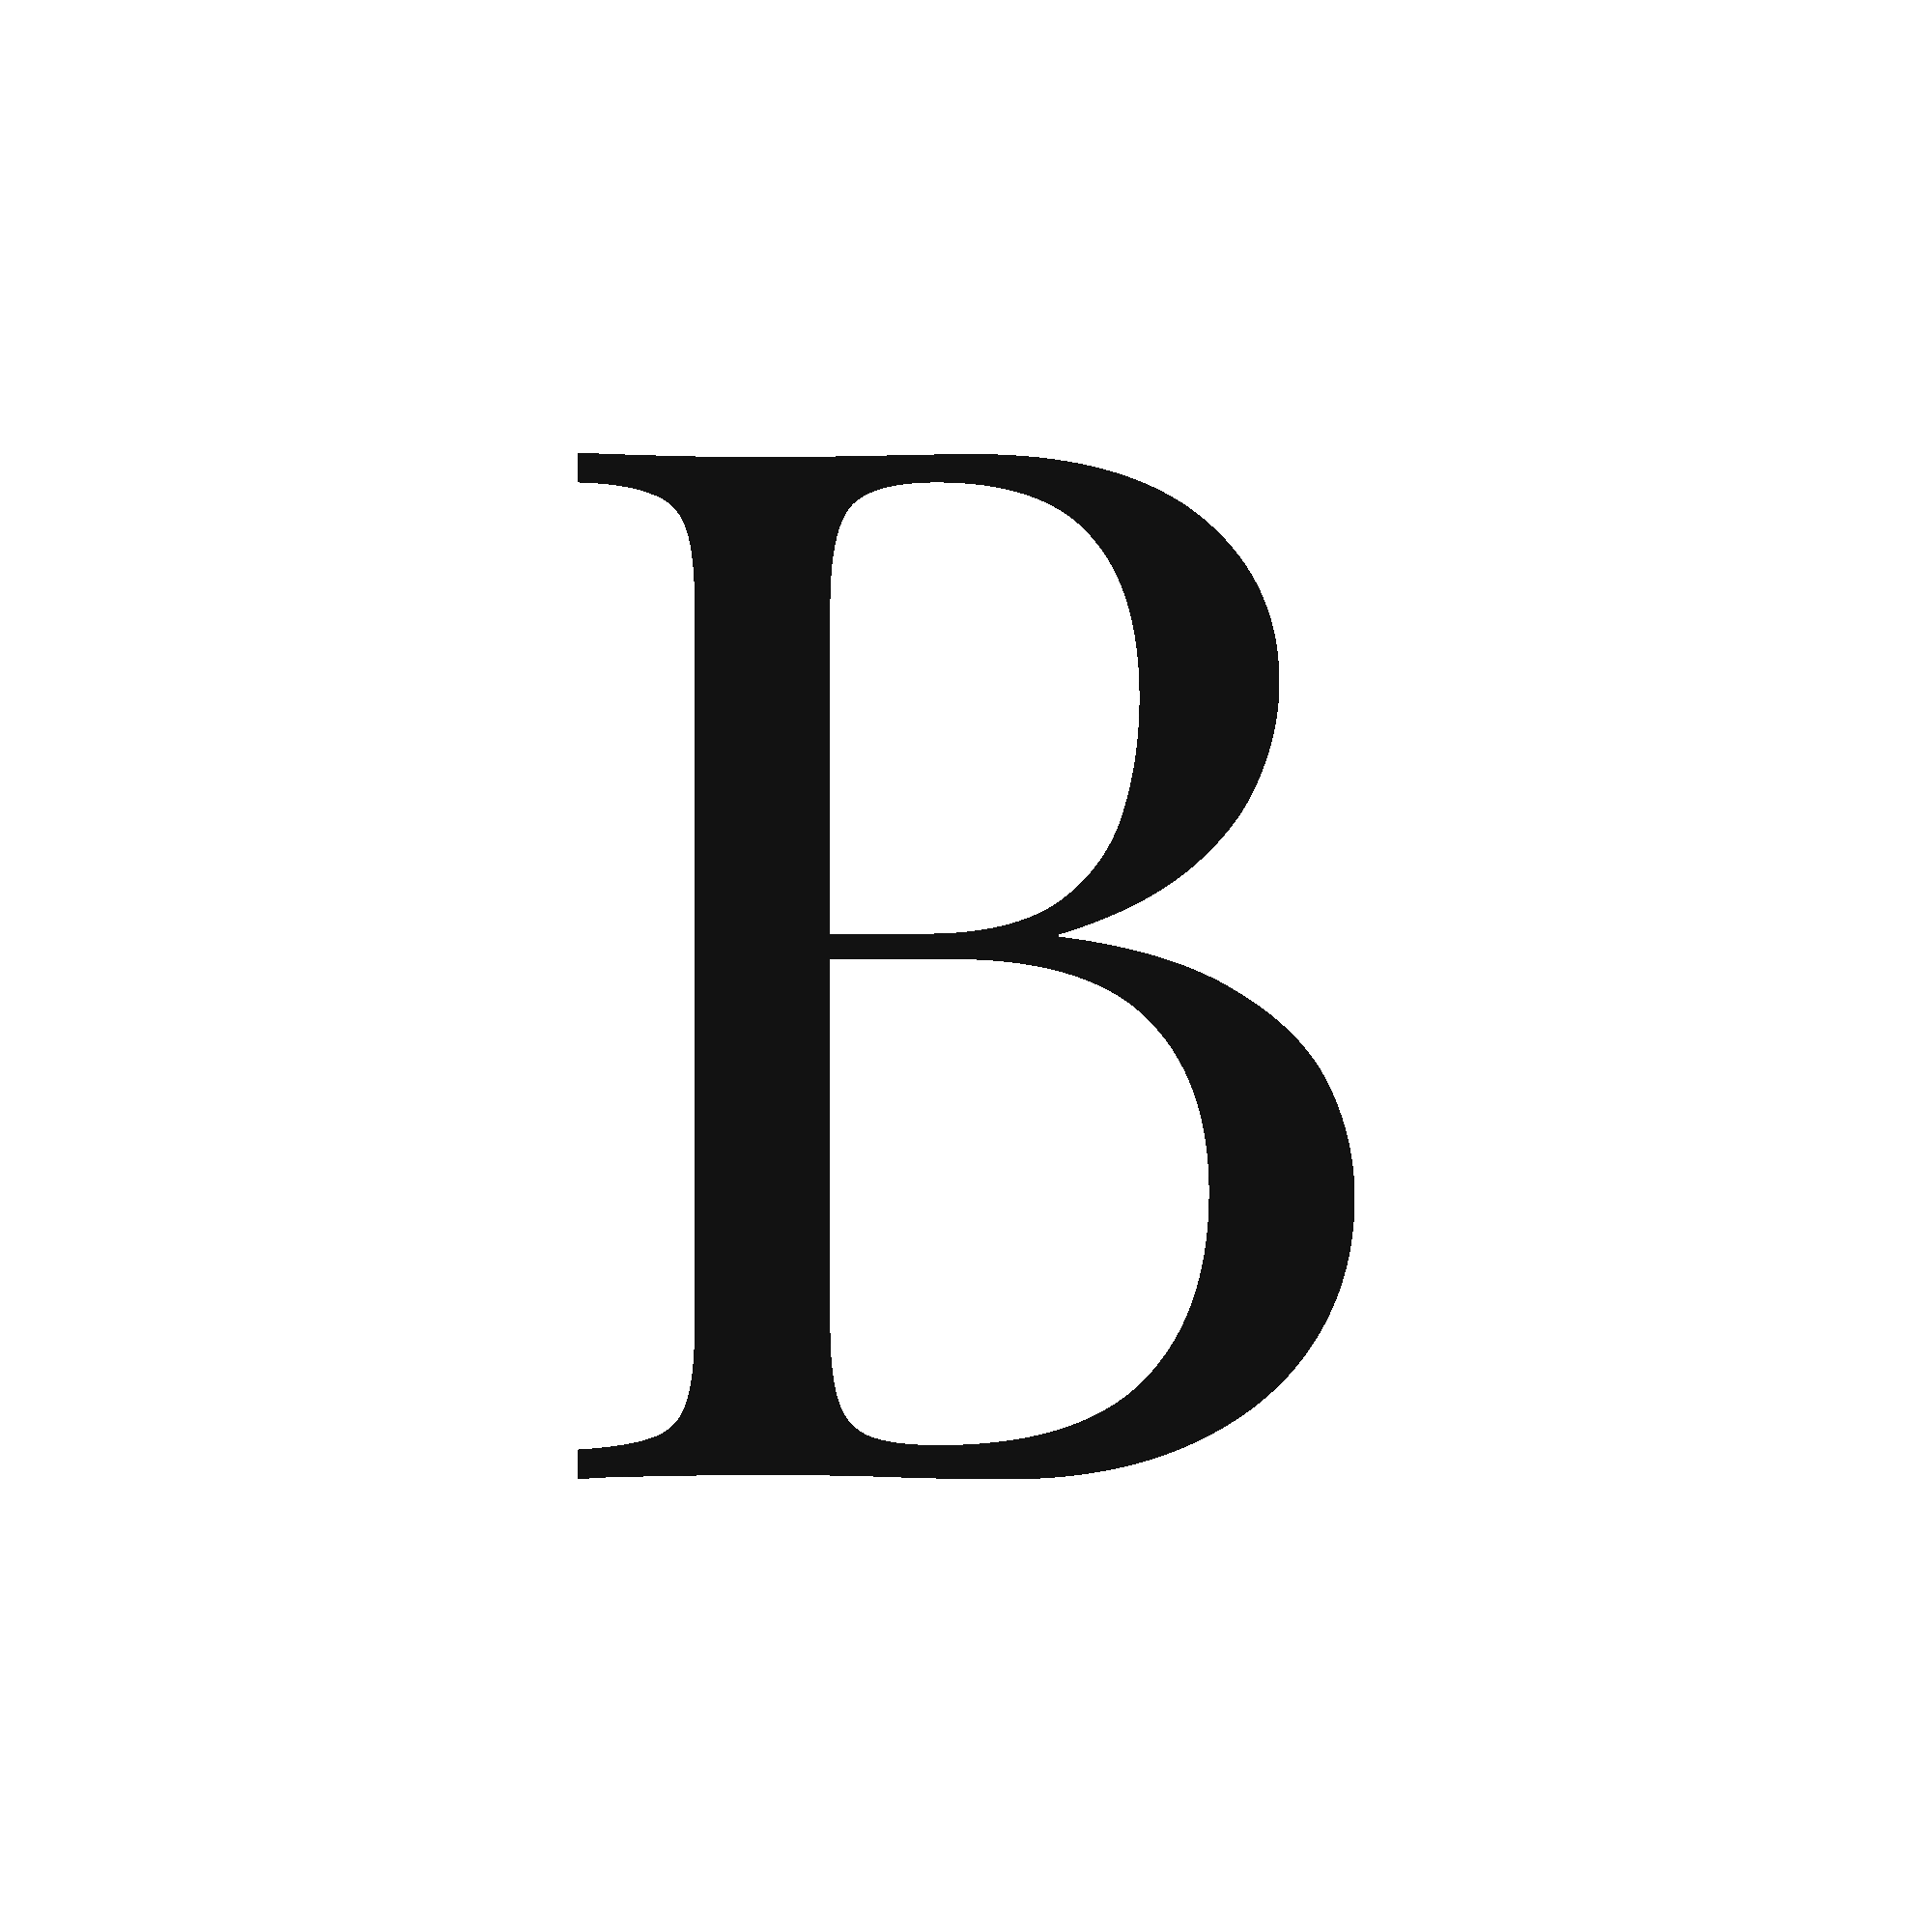 The letter "B," a palm with the thumb folded in, an array of "+" signs, an array of the letters "x," the letter "I," the letter "i," the letter "i" in a bracket, the "+" sign in a bracket, a man with a beard wearing a beanie and glasses, the letter "M," a fist, another "m," an WD-40 spray, and an array of nine "m" letters, all appearing in succession.